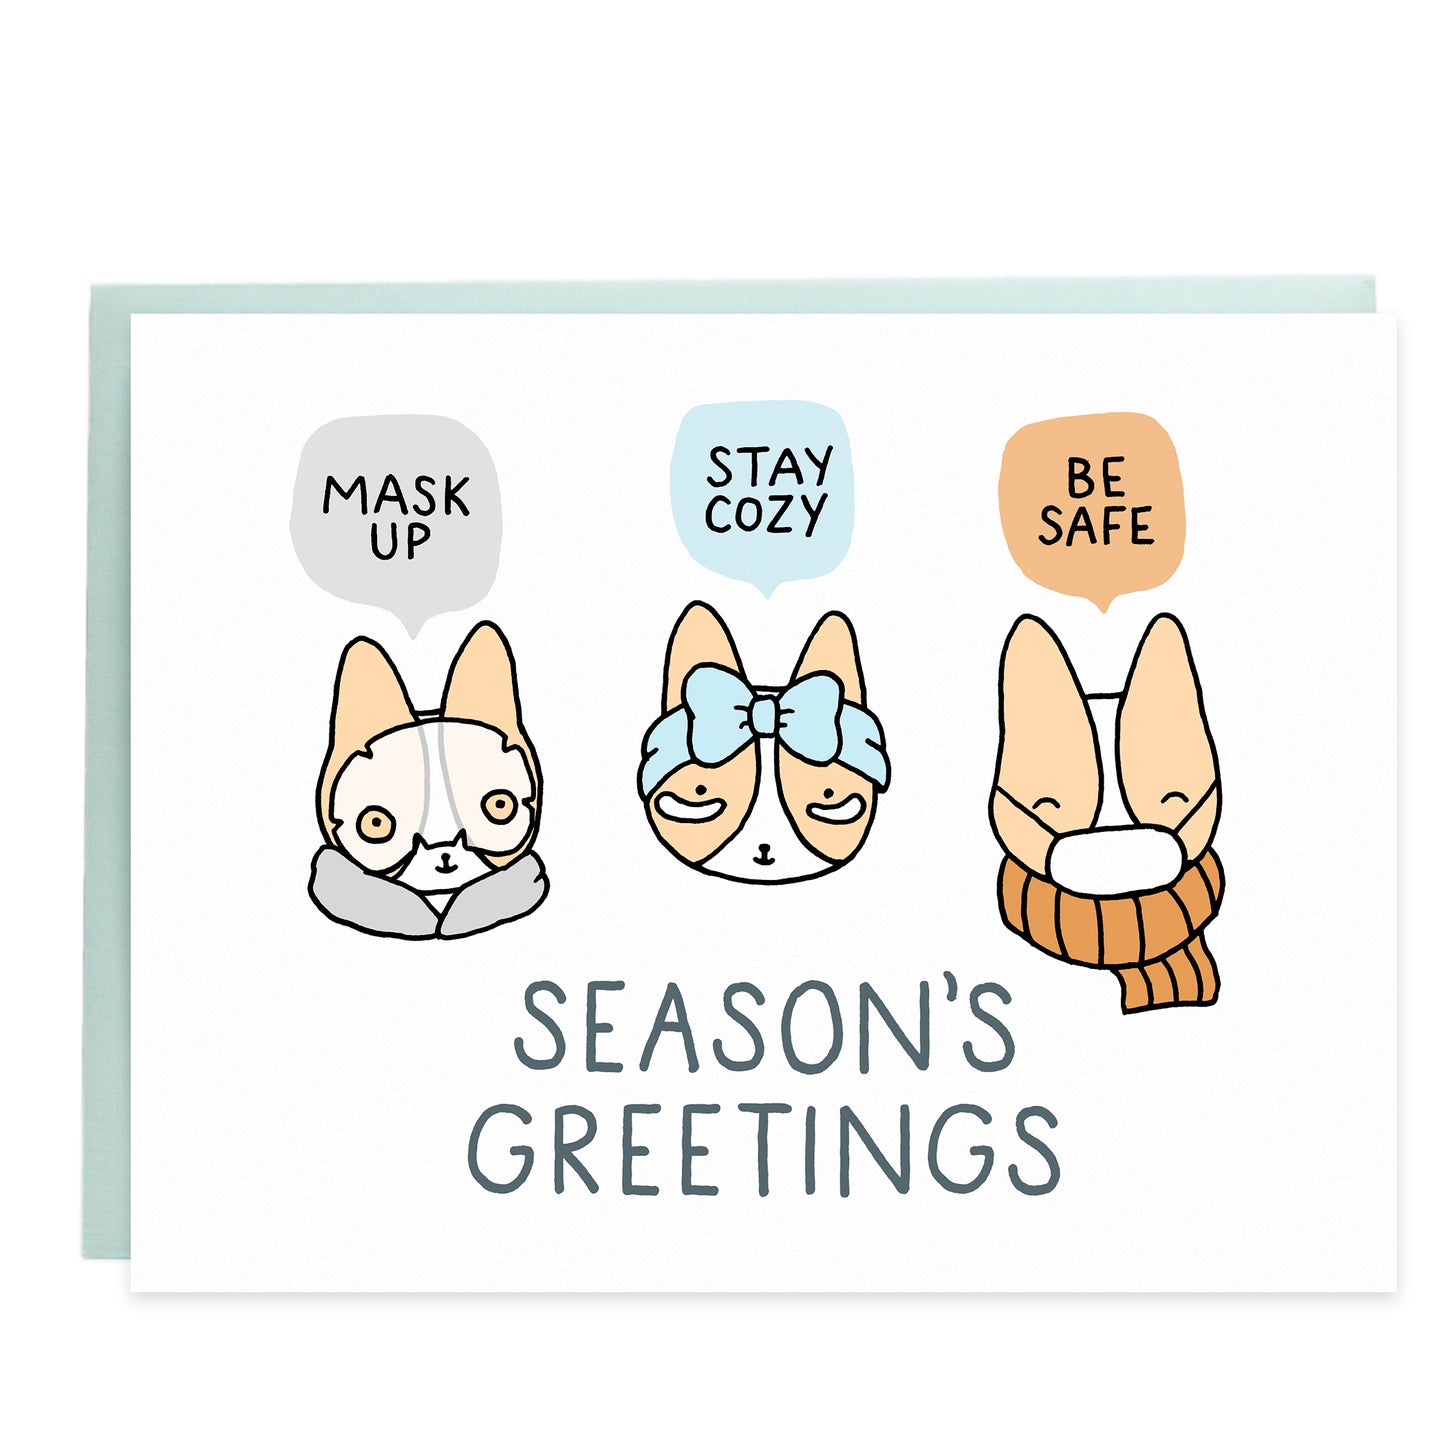 drawing of three corgi heads, one with a sheet mask and gray fluffy collar saying mask up, one with a blue fluffy bow hair band and eye mask saying stay cozy, and one with a face mask and orange scarf saying be safe, large text on bottom reads season's greetings